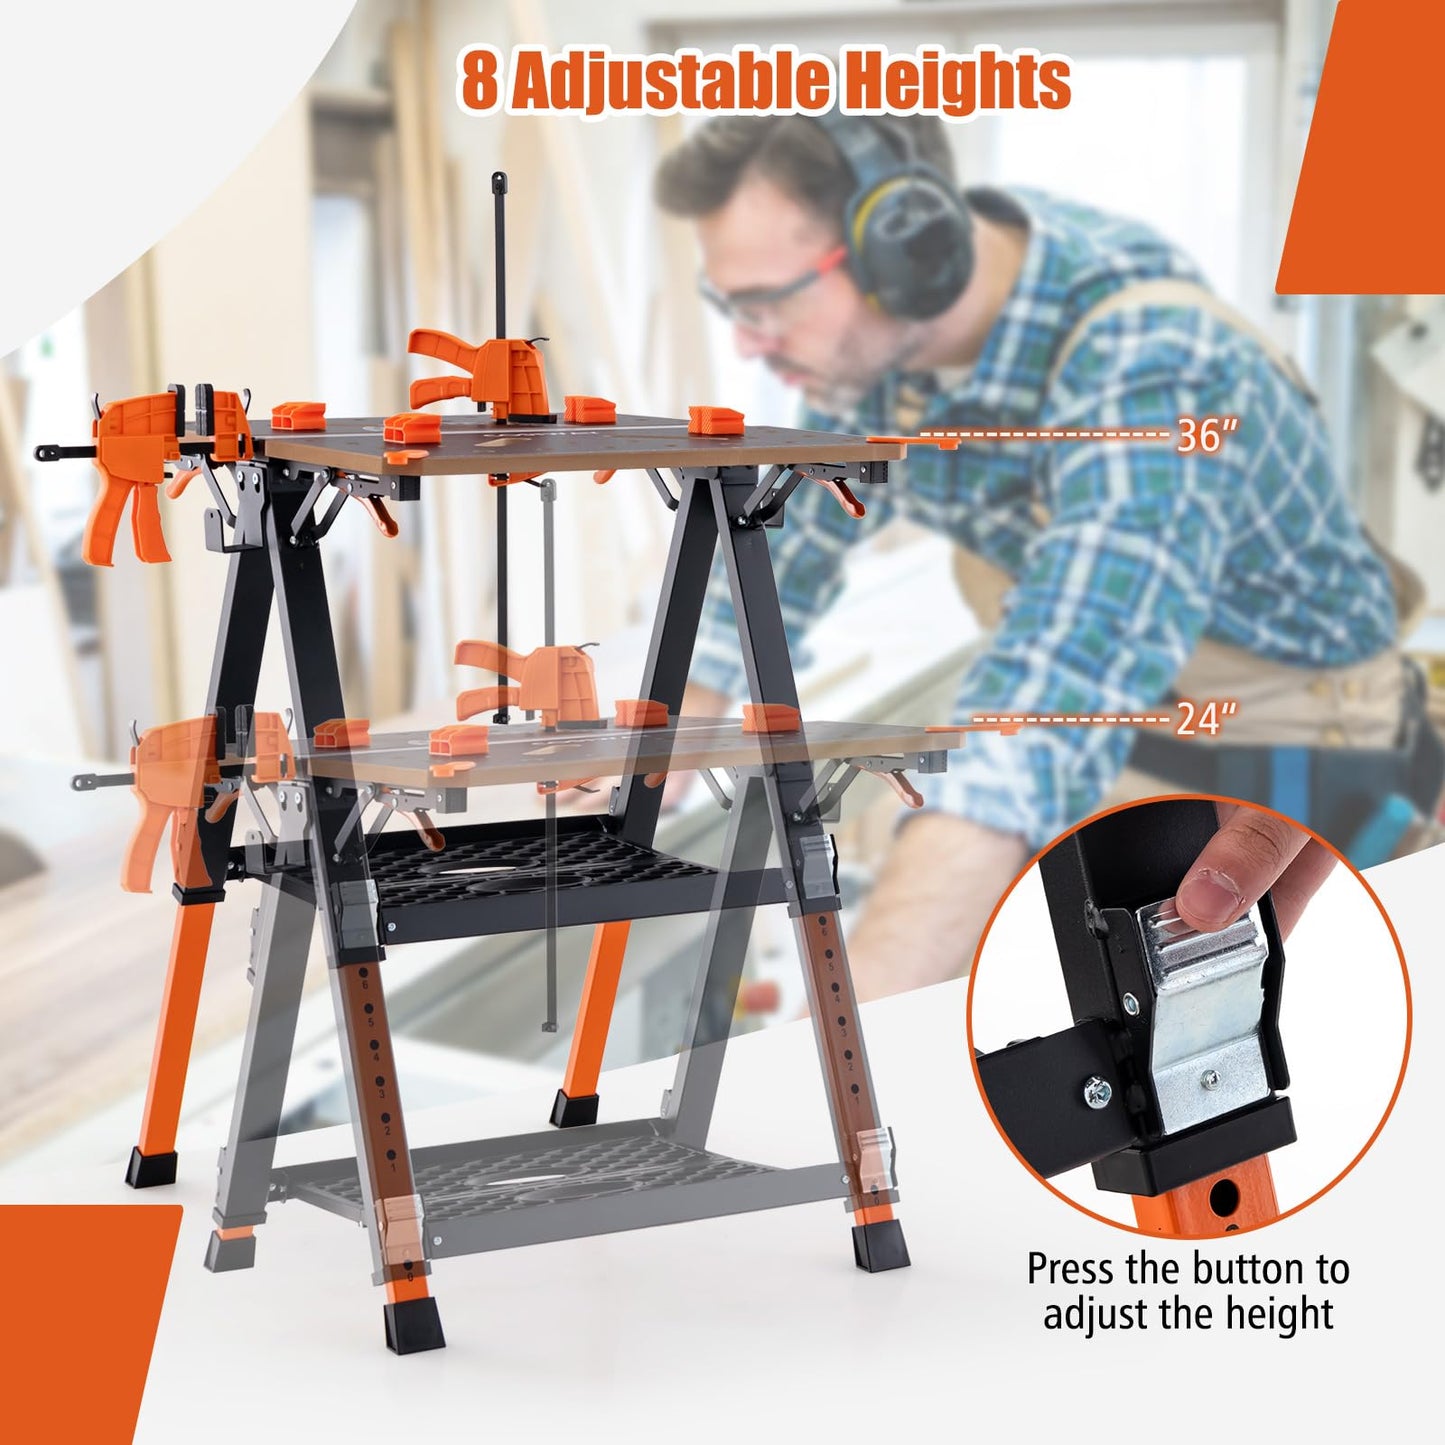 IRONMAX Folding Work Table, 2-in-1 Heavy Duty Workbench & Sawhorse w/ 2 Quick Clamps and 4 Clamp Dogs, 8 Adjustable Height Work Bench for Woodworking